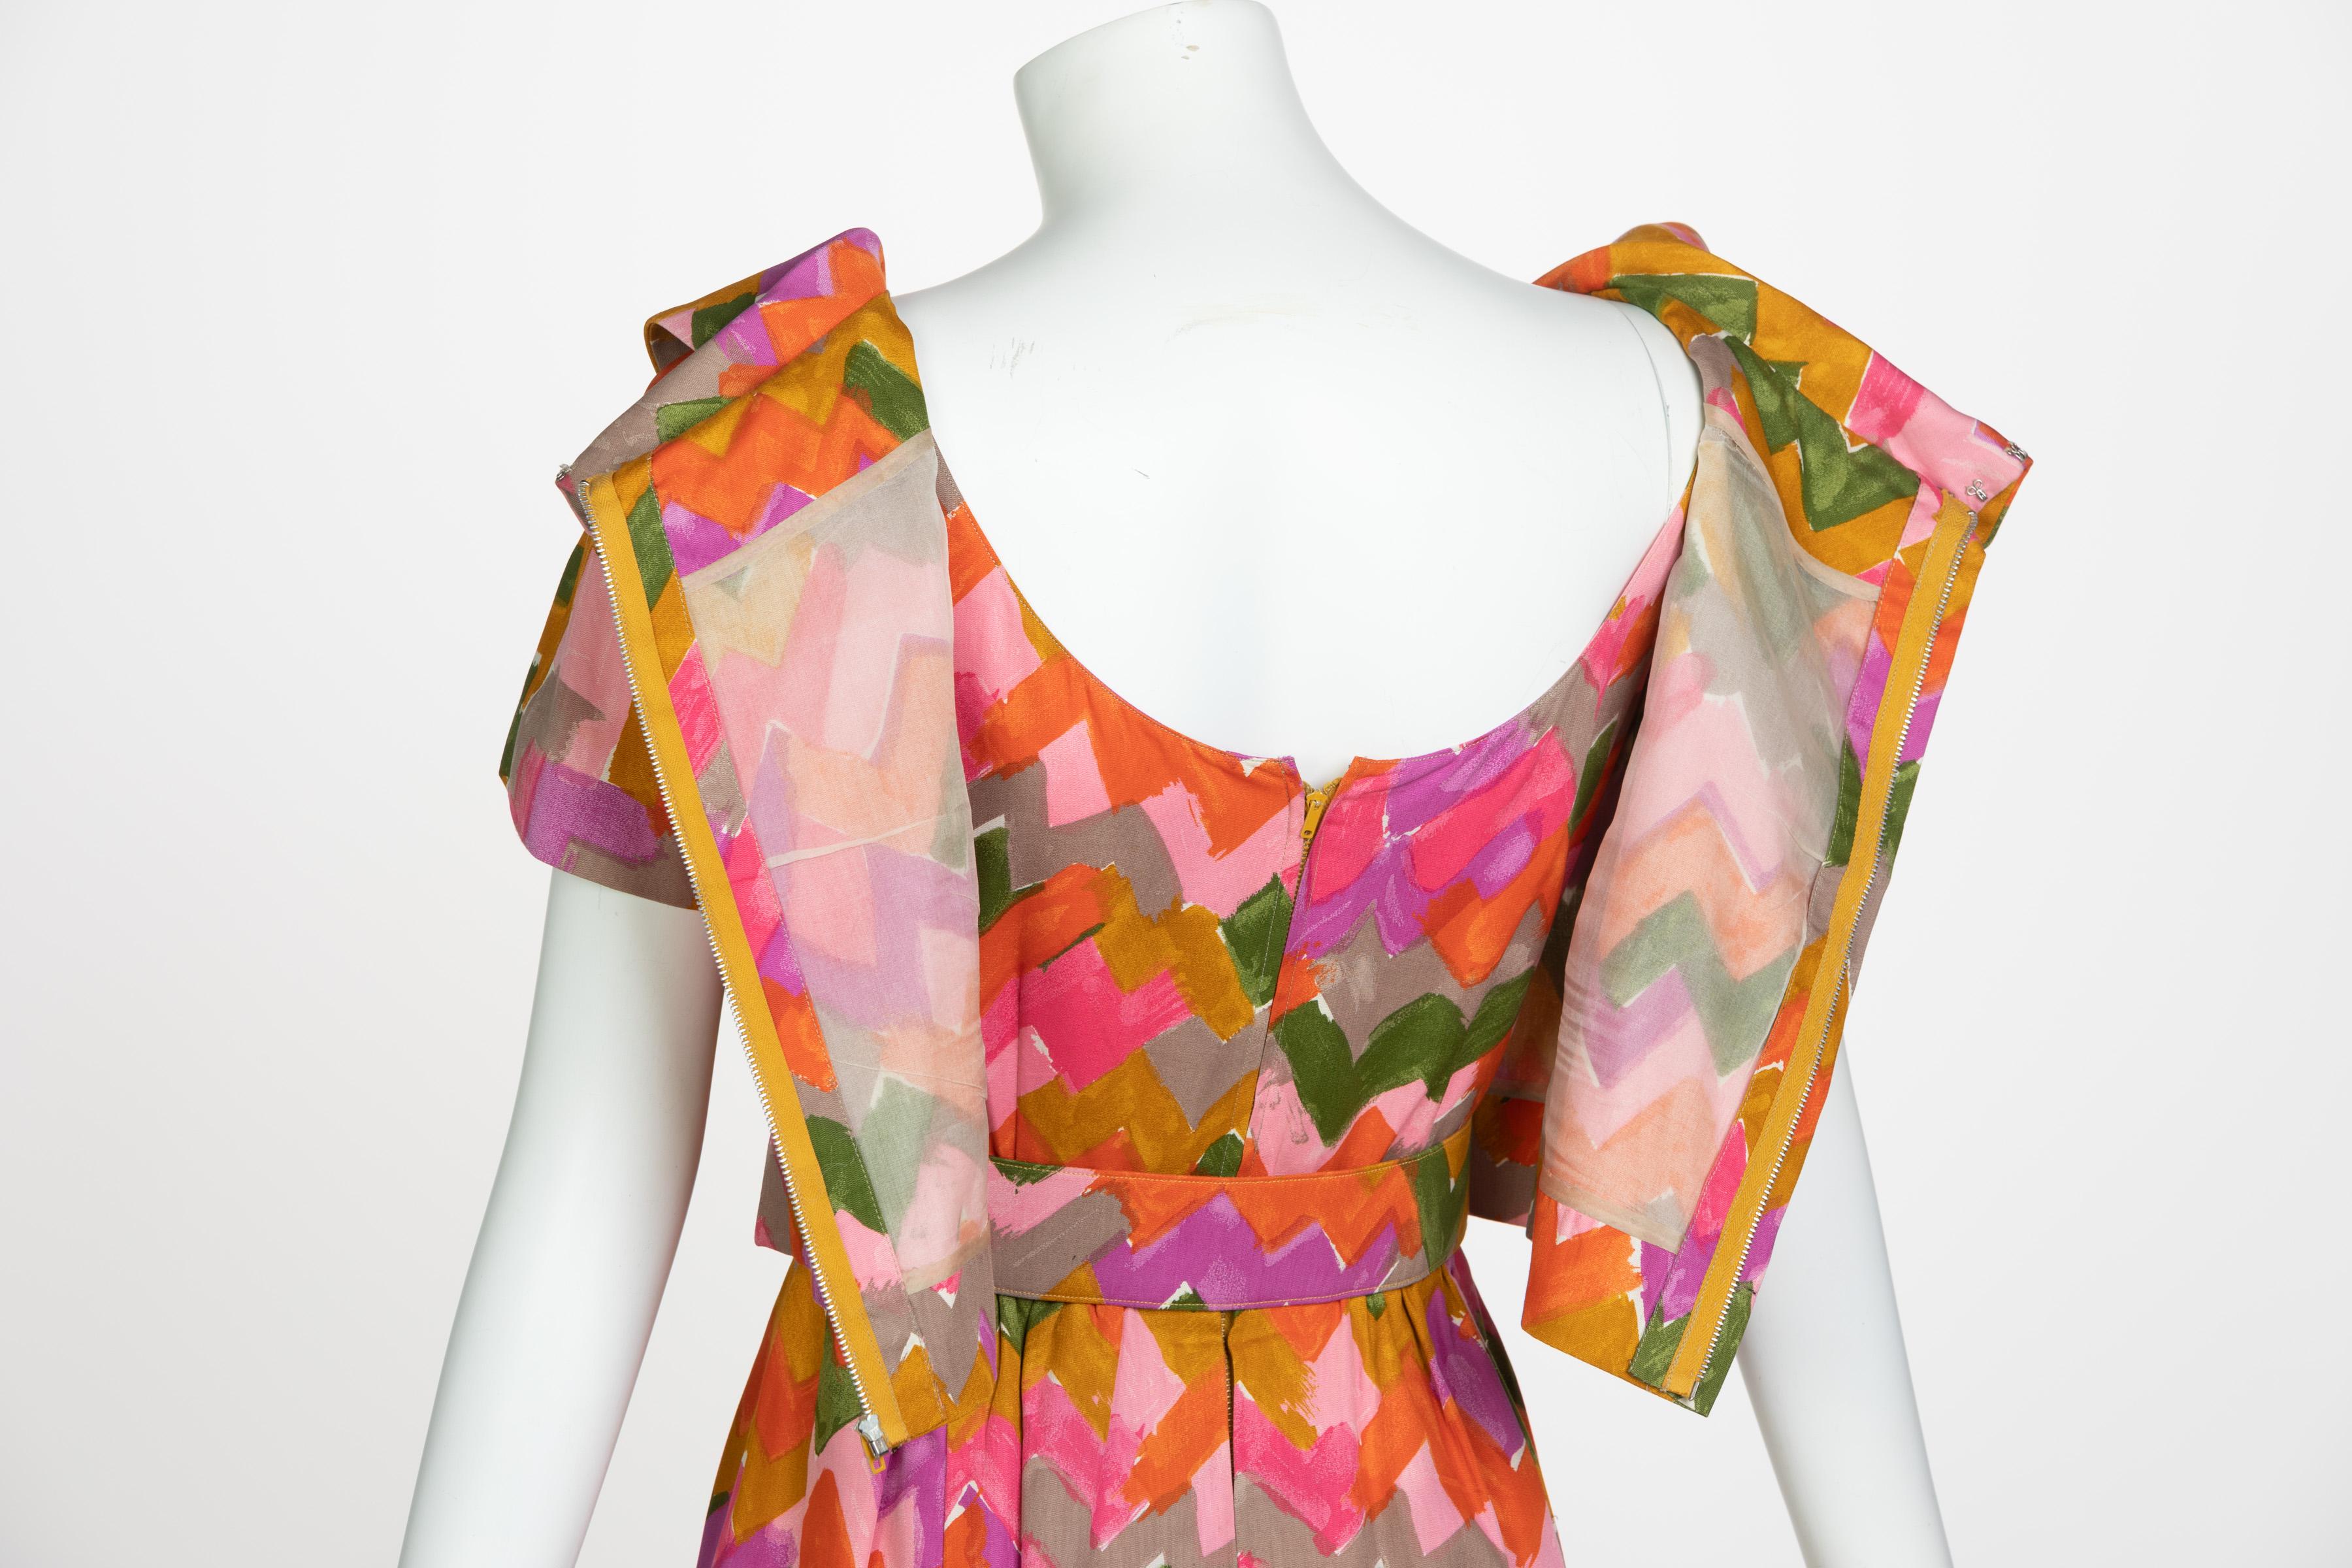 Christian Dior Demi-Couture Colorful Chevron Tailored Belted Dress, 1950s 5